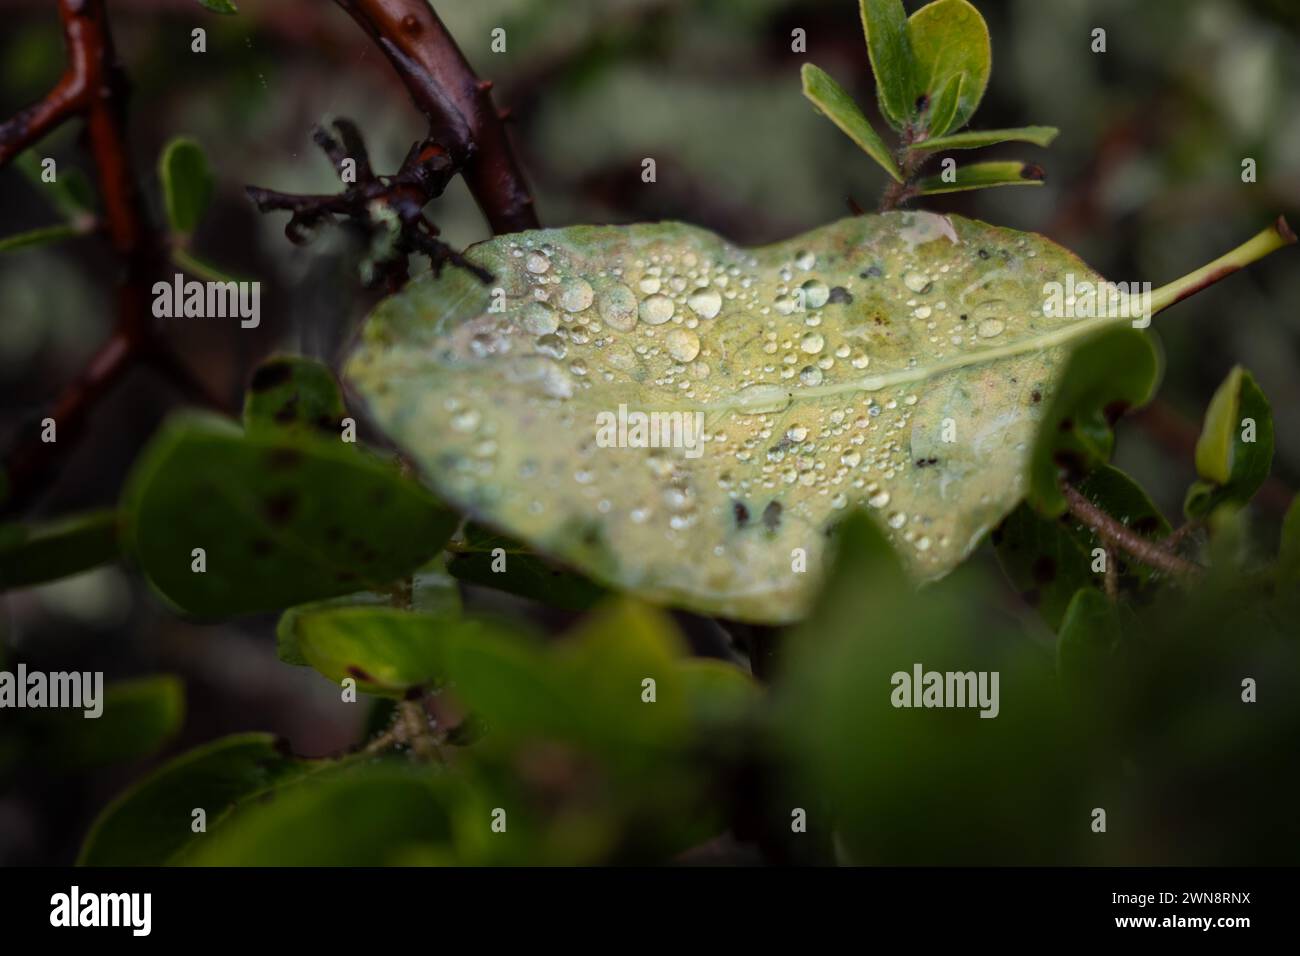 Water drops gather on fallen leaf after rain in forest Stock Photo